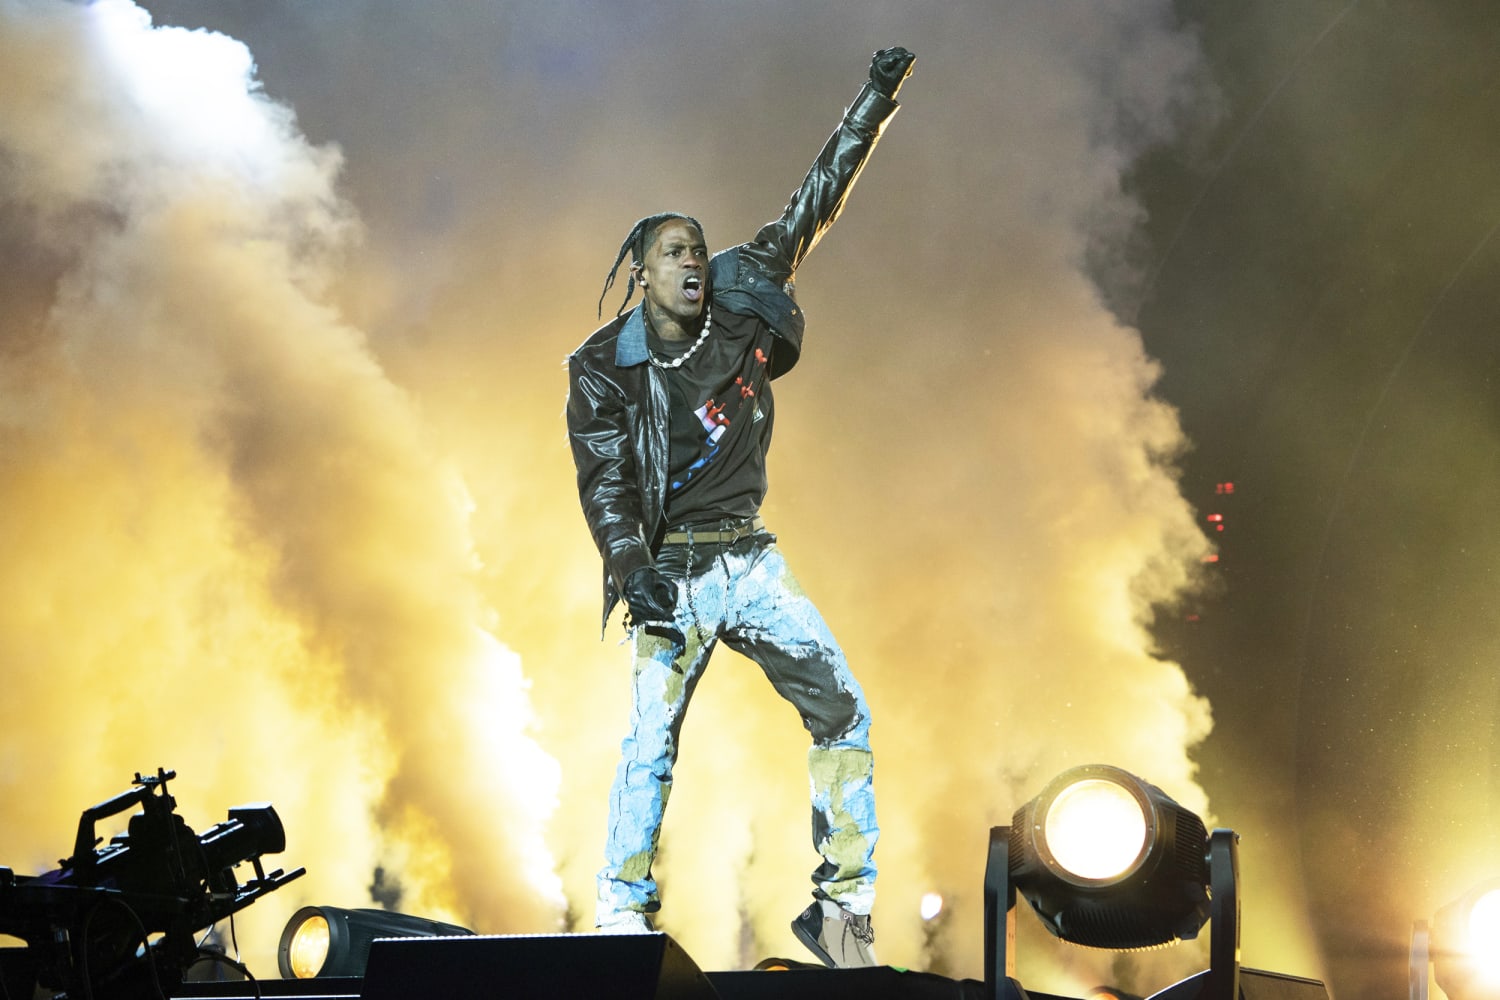 Is Travis Scott responsible for how his audience behaves?